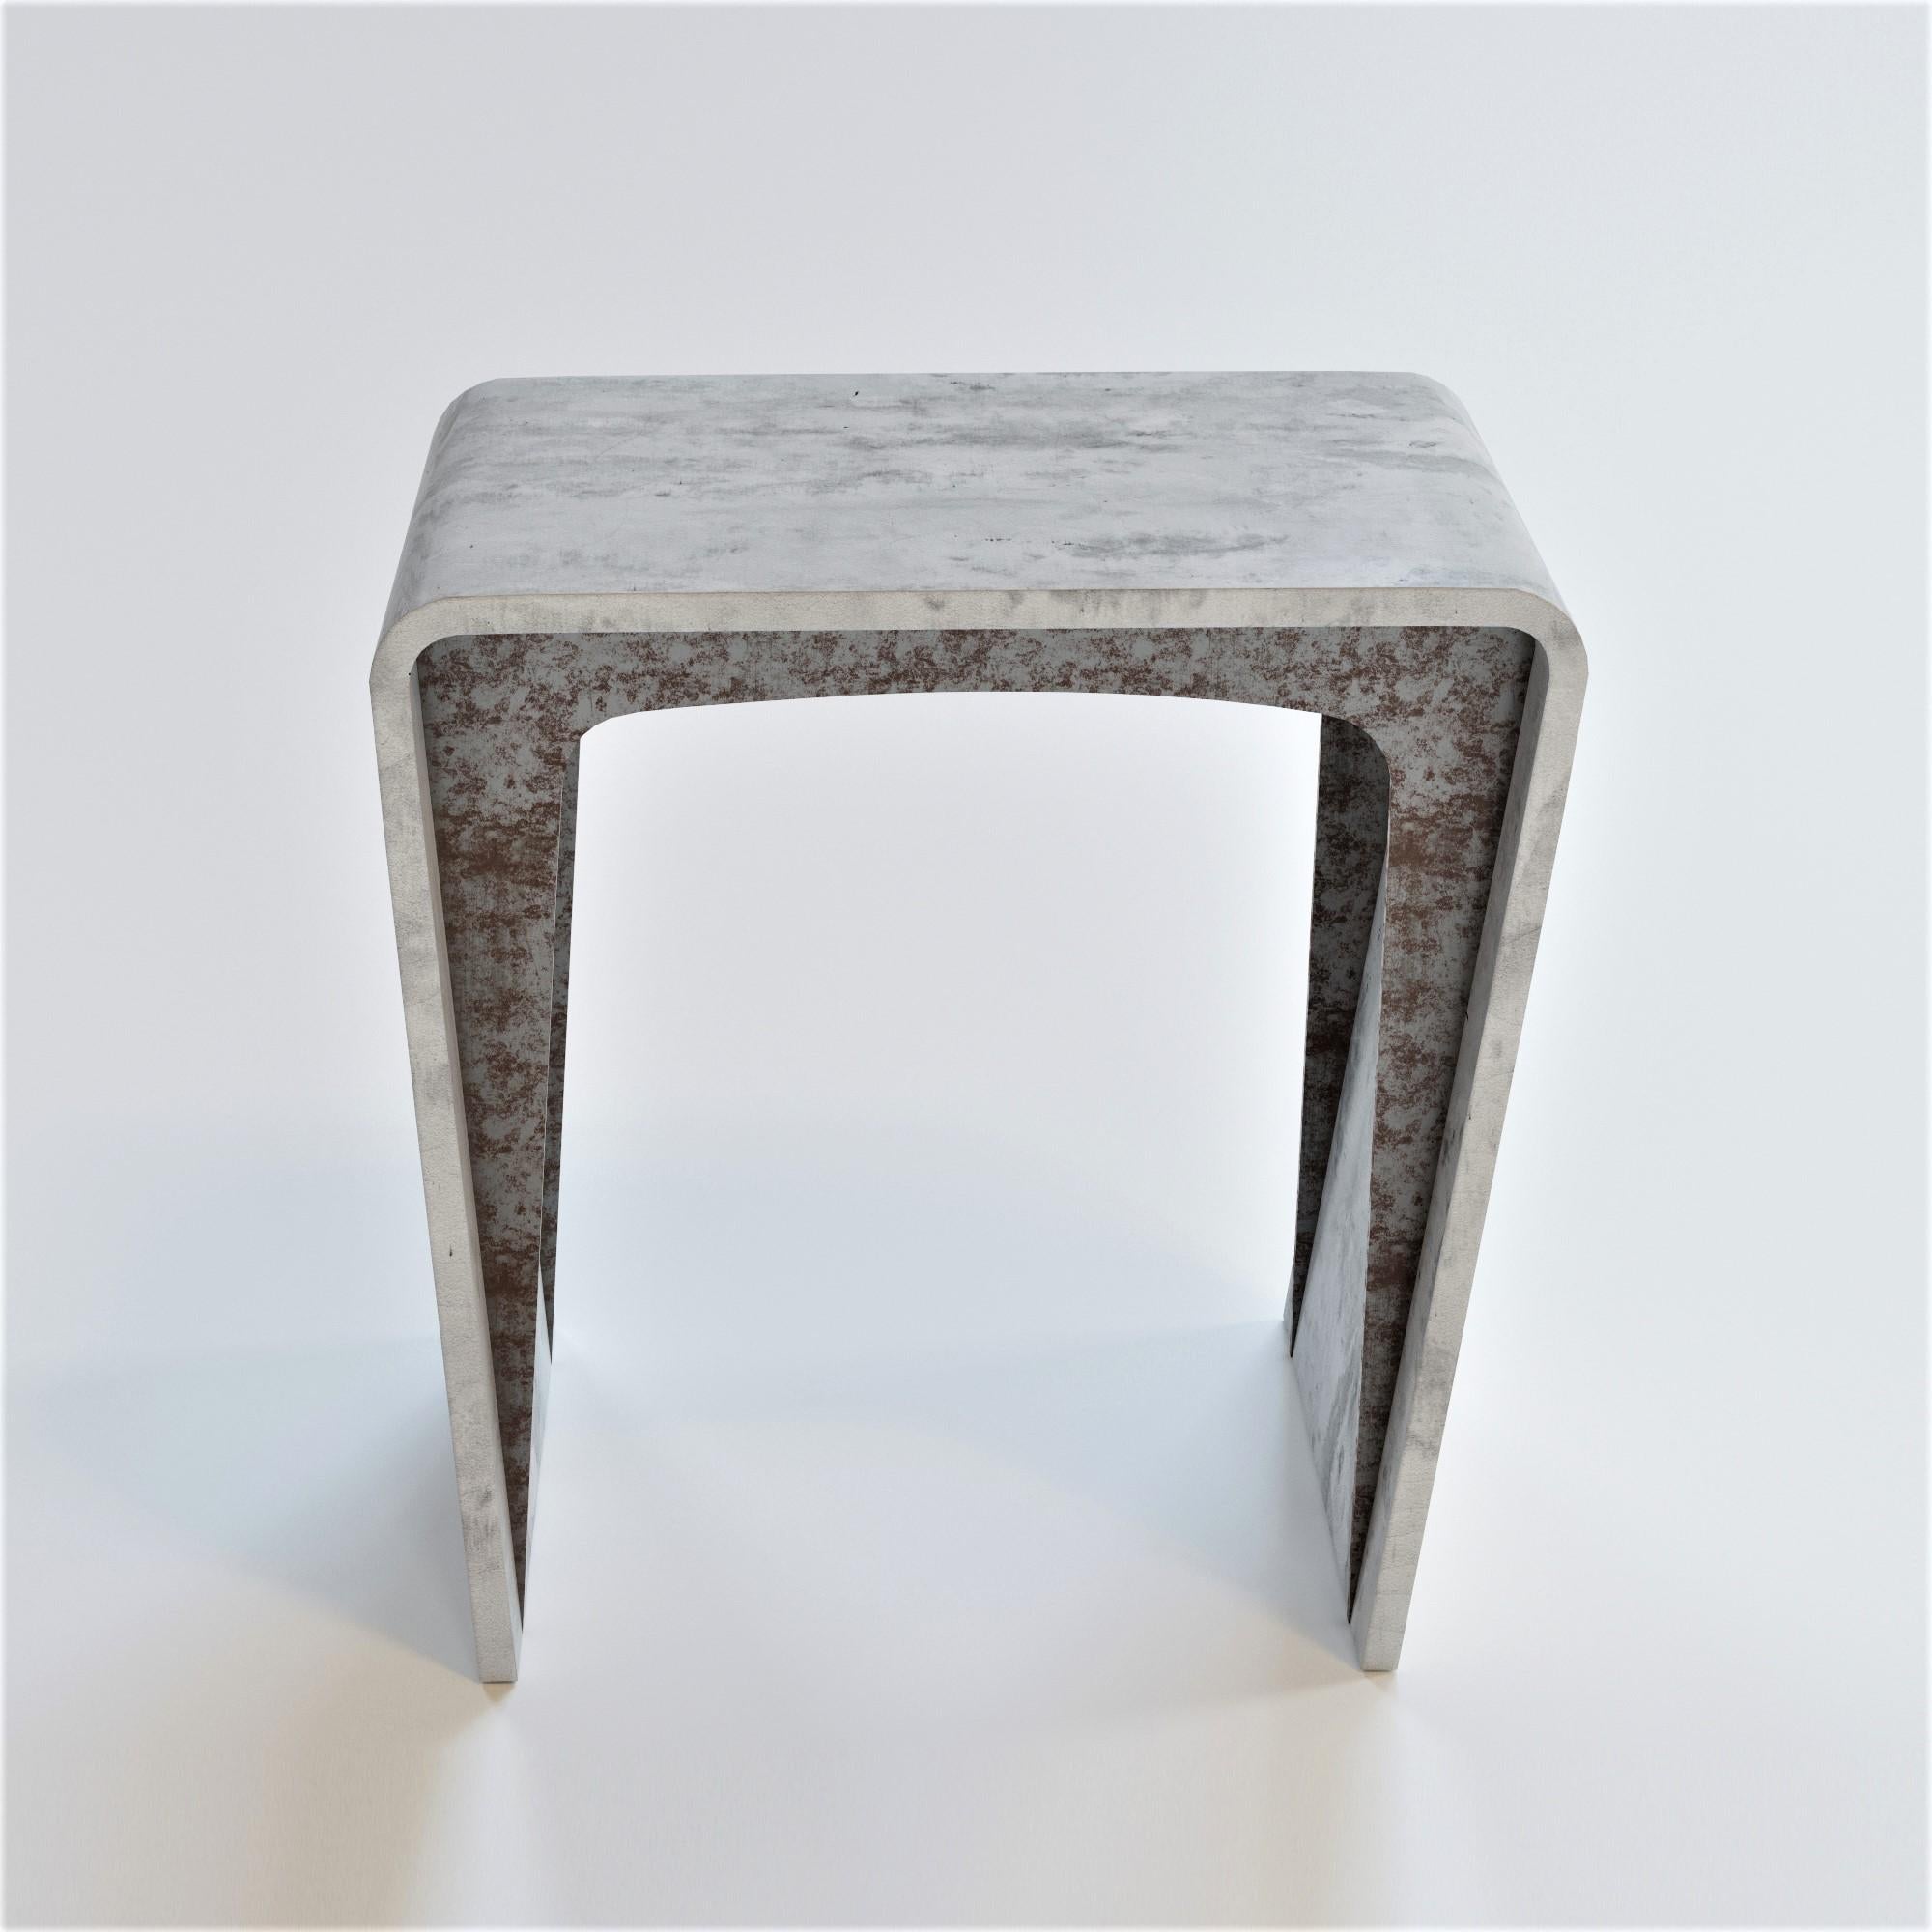 Todos coffee side by Neal Aronowitz design
Dimensions: D 45.7 x W 45.7 x H 38.1 cm
Materials: Concrete canvas, cement mortar, cement pigments, metal.
Also available in black steel, patinated aluminum, COR-ten steel, and brass.
Custom concrete